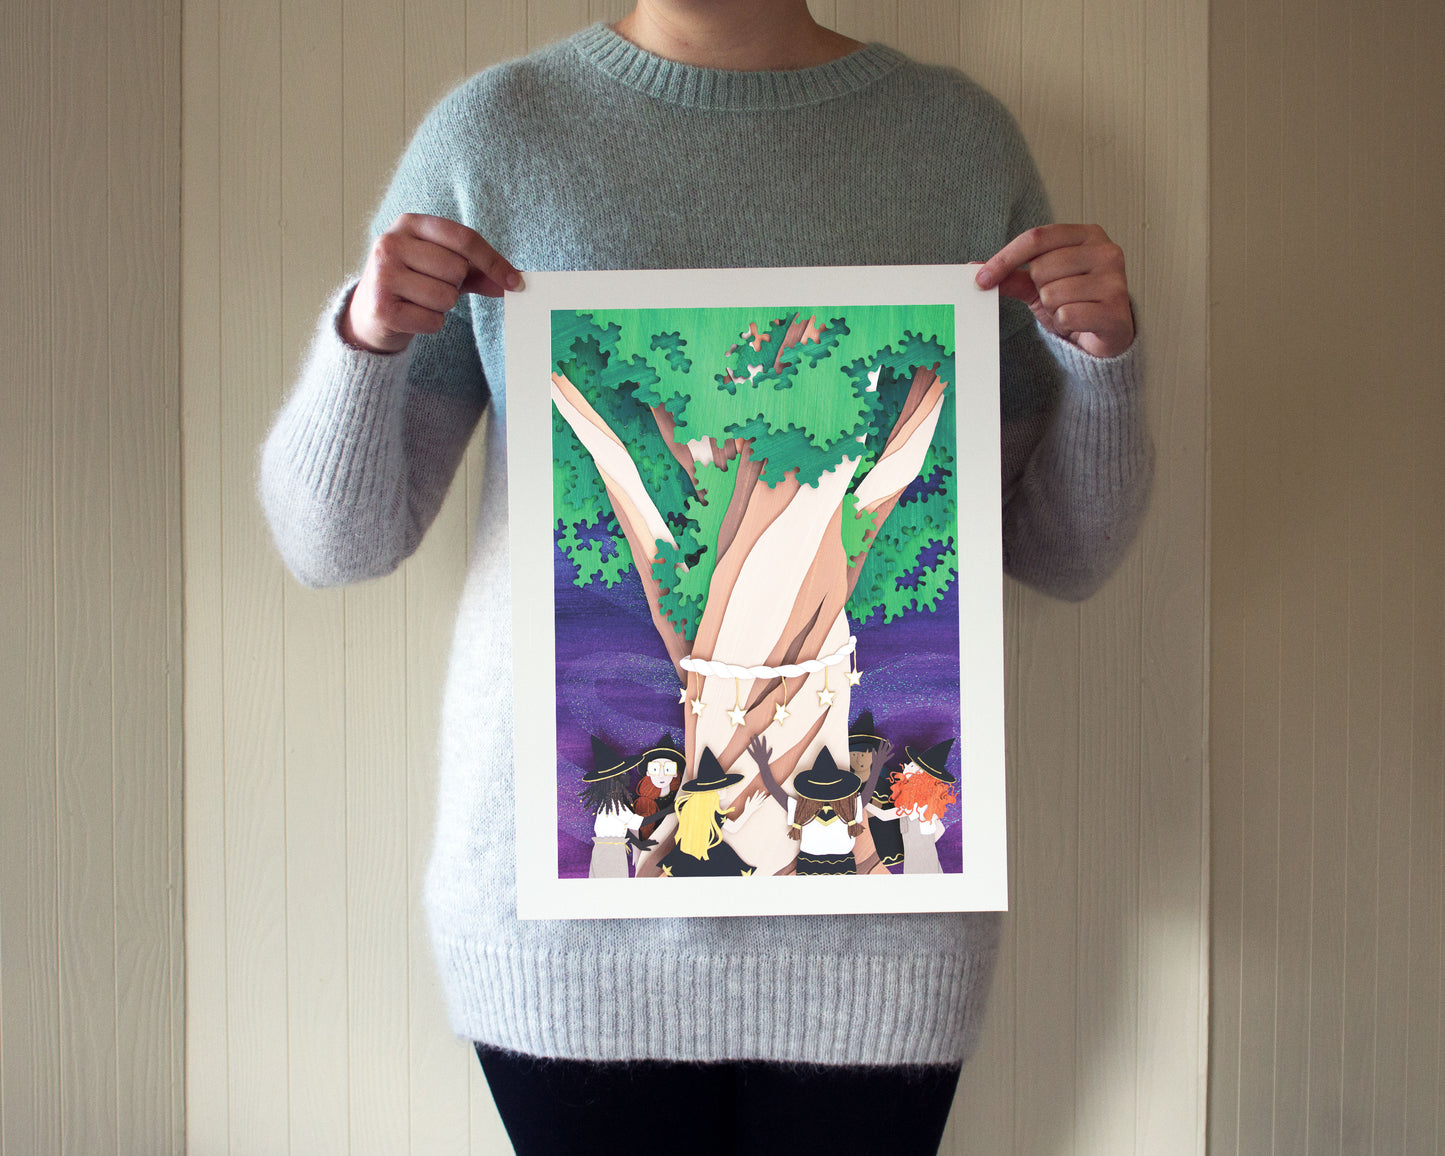 Archival print of cut paper illustration of cute whimsical scene of witches gathered around a tree at night.